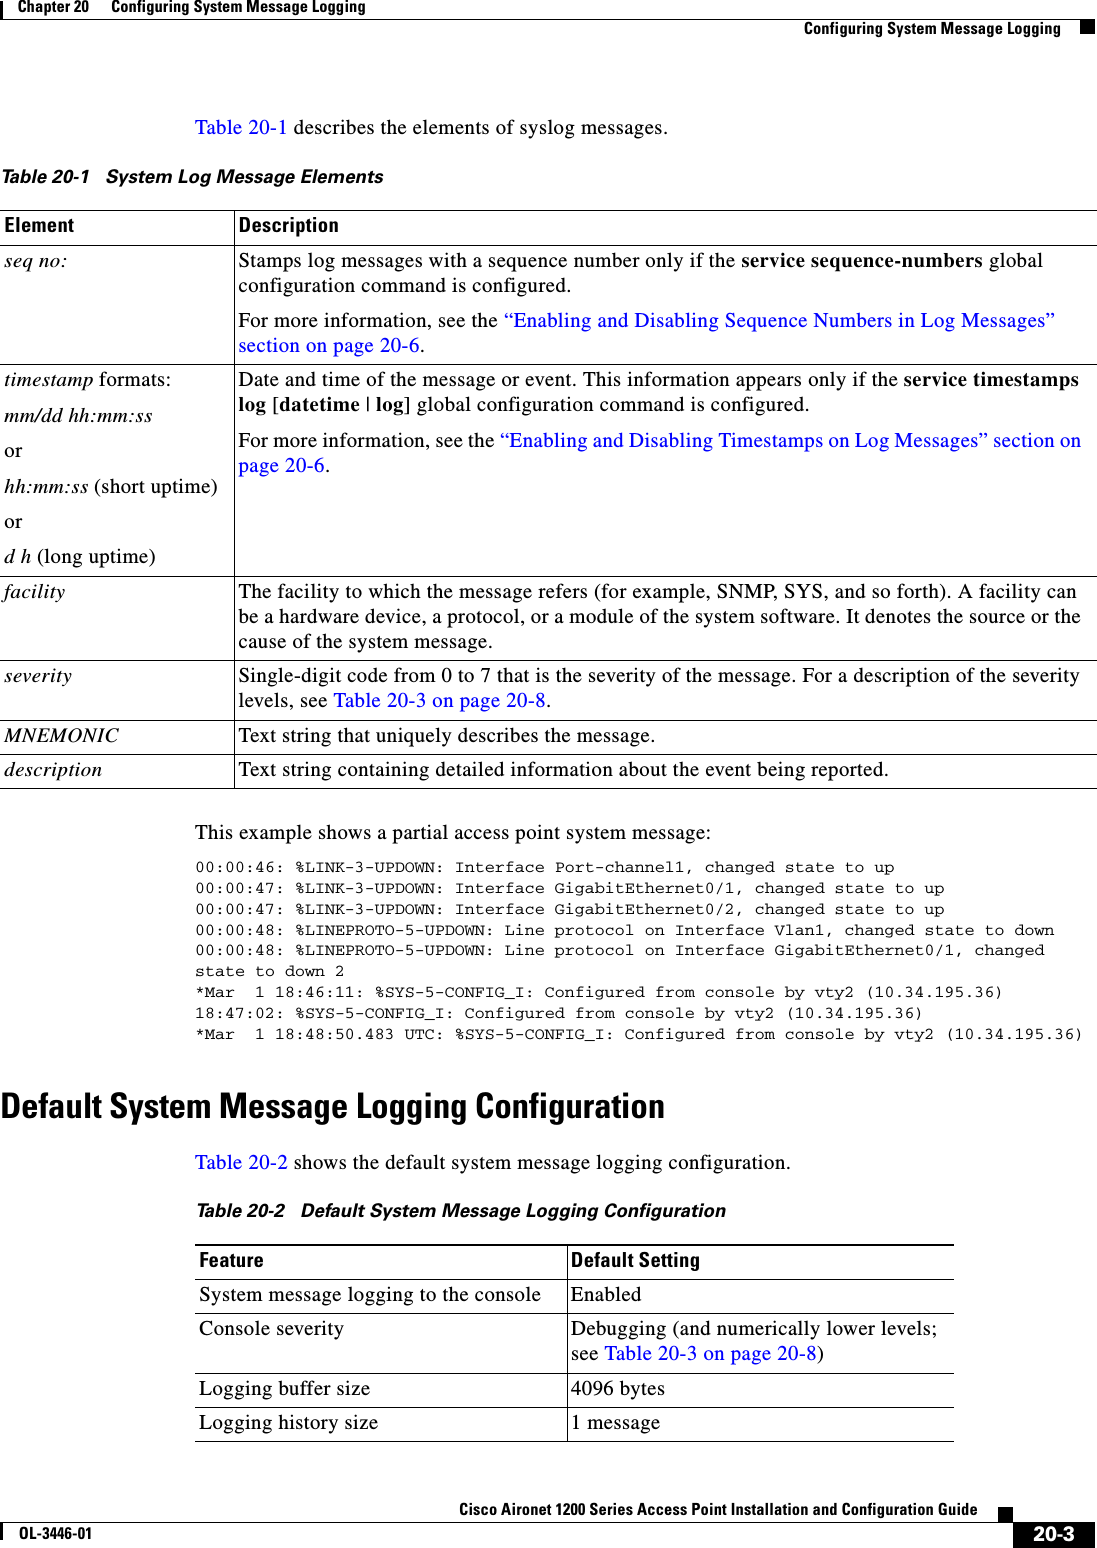 20-3Cisco Aironet 1200 Series Access Point Installation and Configuration GuideOL-3446-01Chapter 20      Configuring System Message LoggingConfiguring System Message LoggingTable 20-1 describes the elements of syslog messages.This example shows a partial access point system message:00:00:46: %LINK-3-UPDOWN: Interface Port-channel1, changed state to up00:00:47: %LINK-3-UPDOWN: Interface GigabitEthernet0/1, changed state to up00:00:47: %LINK-3-UPDOWN: Interface GigabitEthernet0/2, changed state to up00:00:48: %LINEPROTO-5-UPDOWN: Line protocol on Interface Vlan1, changed state to down00:00:48: %LINEPROTO-5-UPDOWN: Line protocol on Interface GigabitEthernet0/1, changed state to down 2*Mar  1 18:46:11: %SYS-5-CONFIG_I: Configured from console by vty2 (10.34.195.36)18:47:02: %SYS-5-CONFIG_I: Configured from console by vty2 (10.34.195.36)*Mar  1 18:48:50.483 UTC: %SYS-5-CONFIG_I: Configured from console by vty2 (10.34.195.36) Default System Message Logging ConfigurationTable 20-2 shows the default system message logging configuration.Table 20-1 System Log Message ElementsElement Descriptionseq no: Stamps log messages with a sequence number only if the service sequence-numbers global configuration command is configured. For more information, see the “Enabling and Disabling Sequence Numbers in Log Messages”section on page 20-6.timestamp formats:mm/dd hh:mm:ssorhh:mm:ss (short uptime)ord h (long uptime)Date and time of the message or event. This information appears only if the service timestamps log [datetime | log] global configuration command is configured.For more information, see the “Enabling and Disabling Timestamps on Log Messages” section on page 20-6.facility The facility to which the message refers (for example, SNMP, SYS, and so forth). A facility can be a hardware device, a protocol, or a module of the system software. It denotes the source or the cause of the system message.severity Single-digit code from 0 to 7 that is the severity of the message. For a description of the severity levels, see Table 20-3 on page 20-8.MNEMONIC Text string that uniquely describes the message.description Text string containing detailed information about the event being reported.Table 20-2 Default System Message Logging ConfigurationFeature Default SettingSystem message logging to the console EnabledConsole severity Debugging (and numerically lower levels; see Table 20-3 on page 20-8)Logging buffer size 4096 bytesLogging history size 1 message